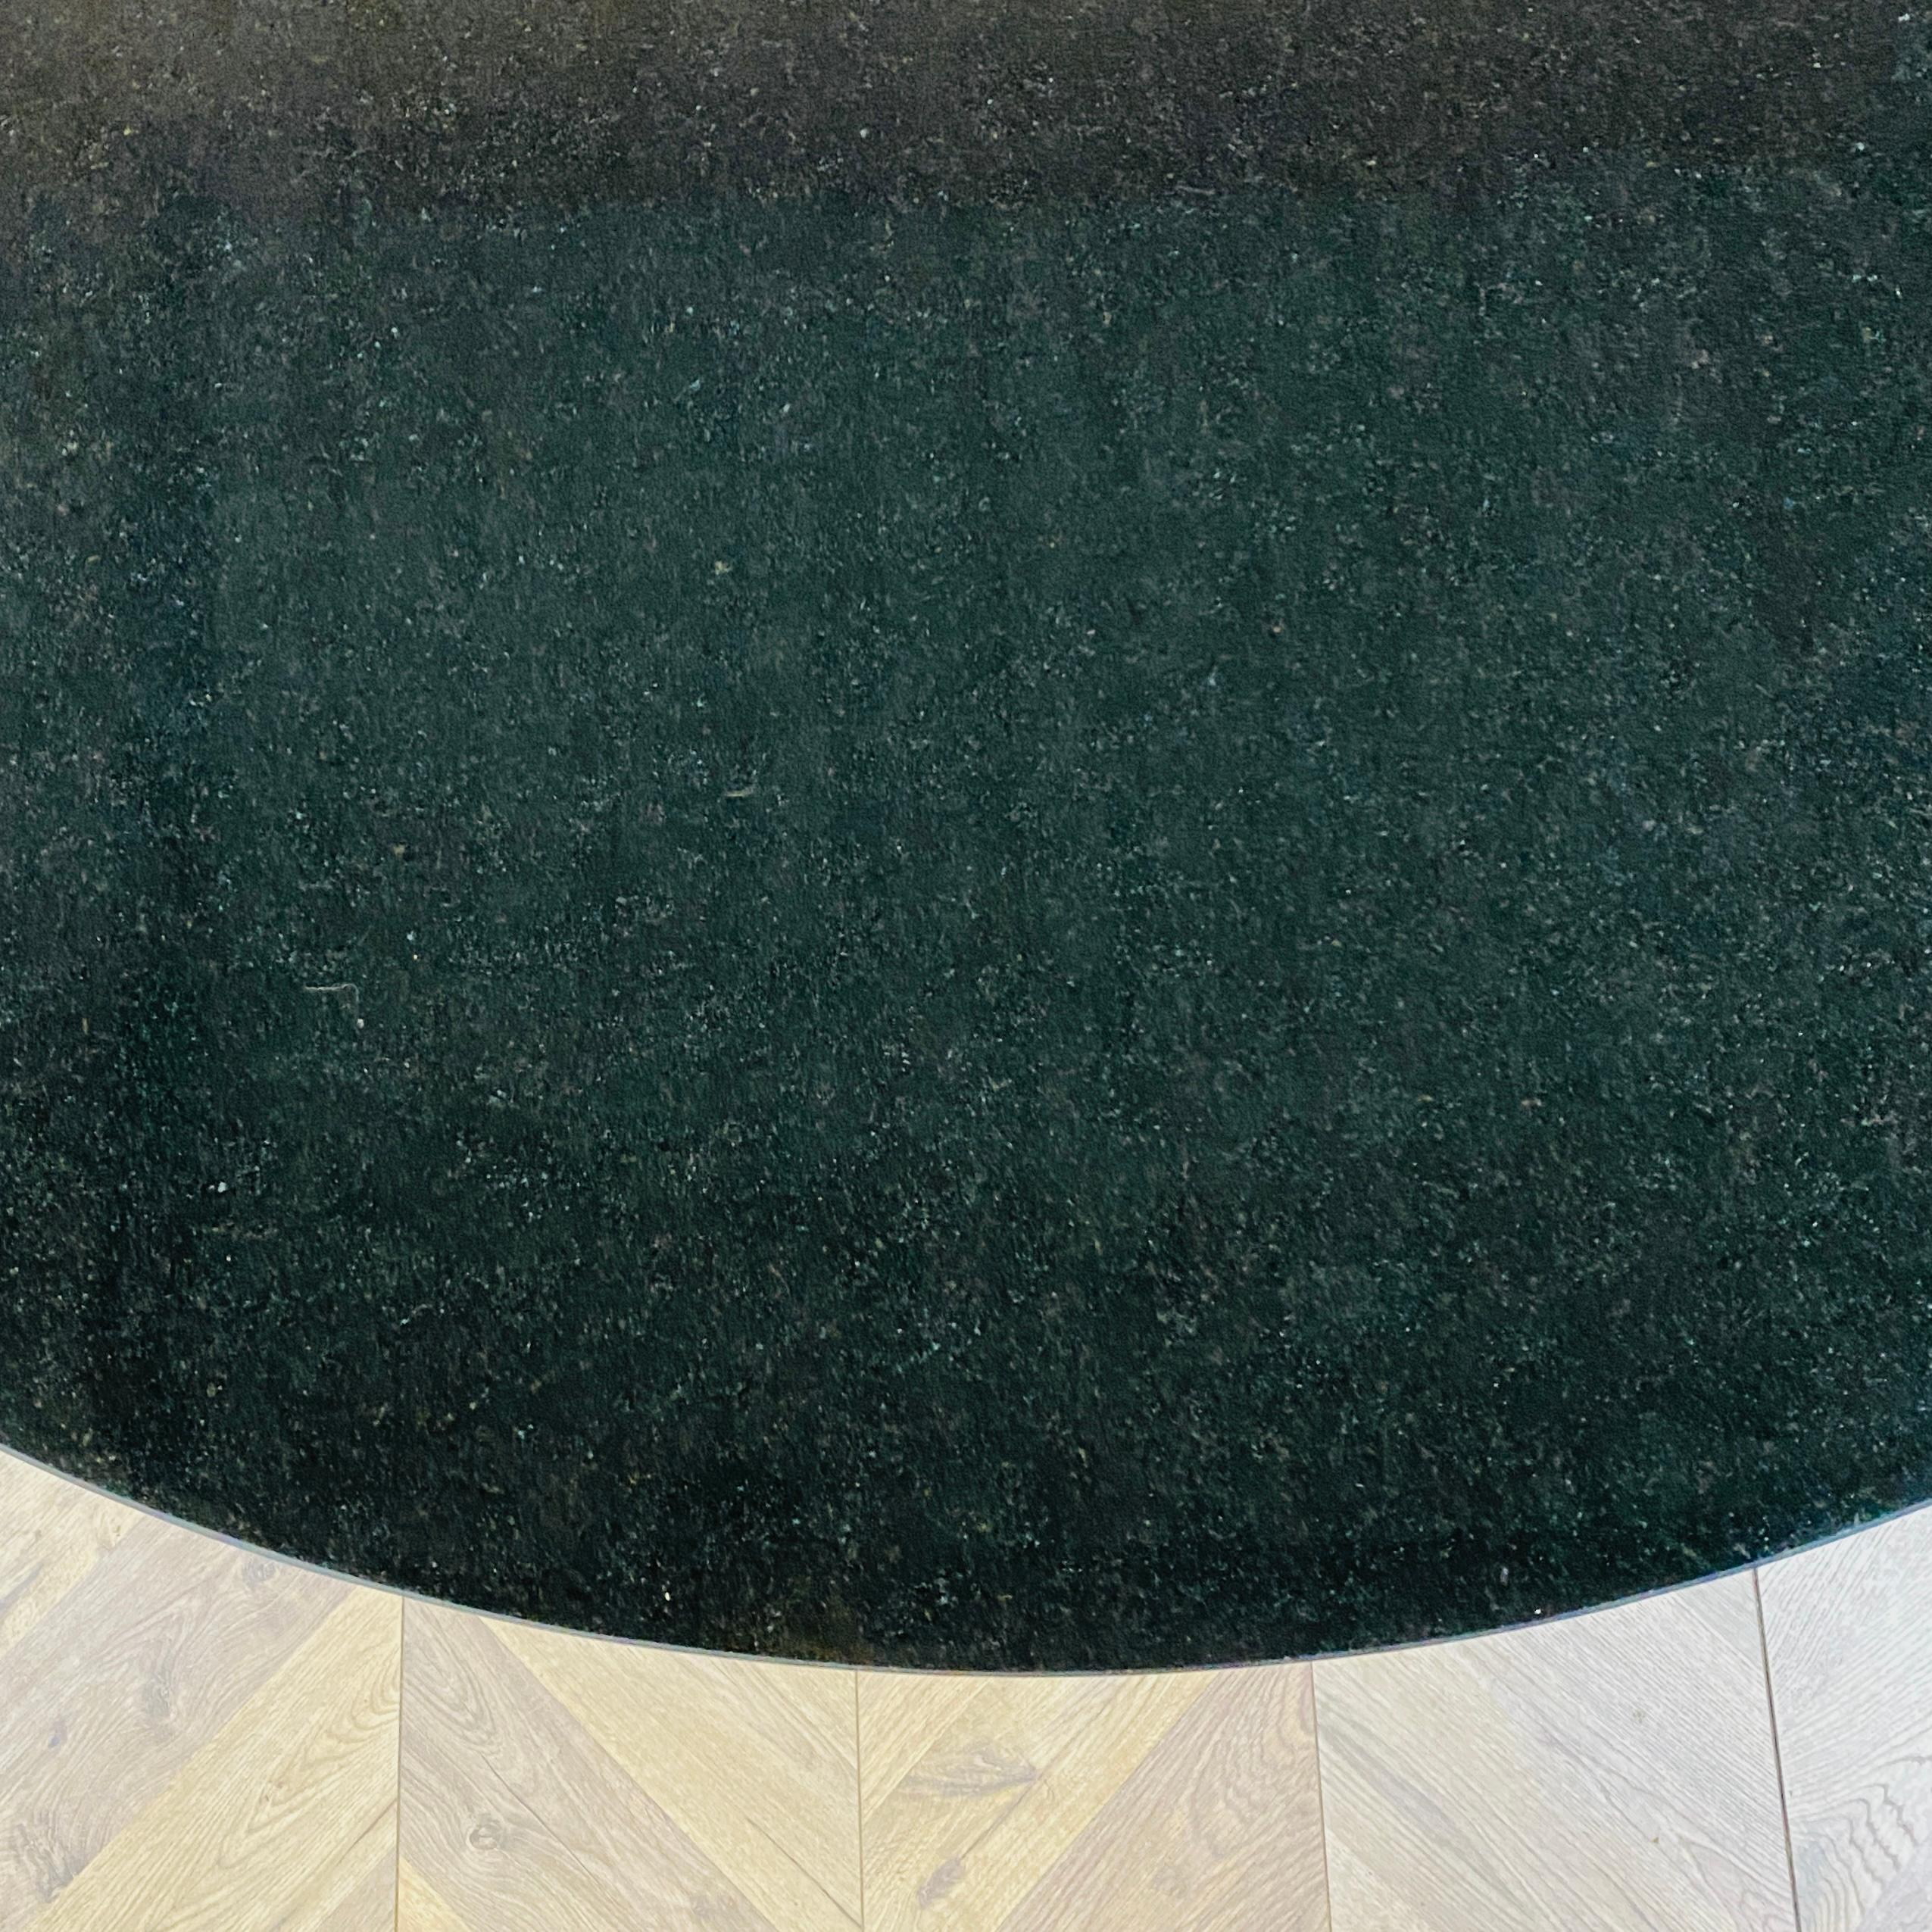 A Lovely Vintage, Round Granite & Chrome Dining Table, in the style of Eero Saarinen’s Tulip Table, circa 1970s.

The table top is extremely heavy and made from black granite.

The table is in great condition, with only minor scuffs in-keeping